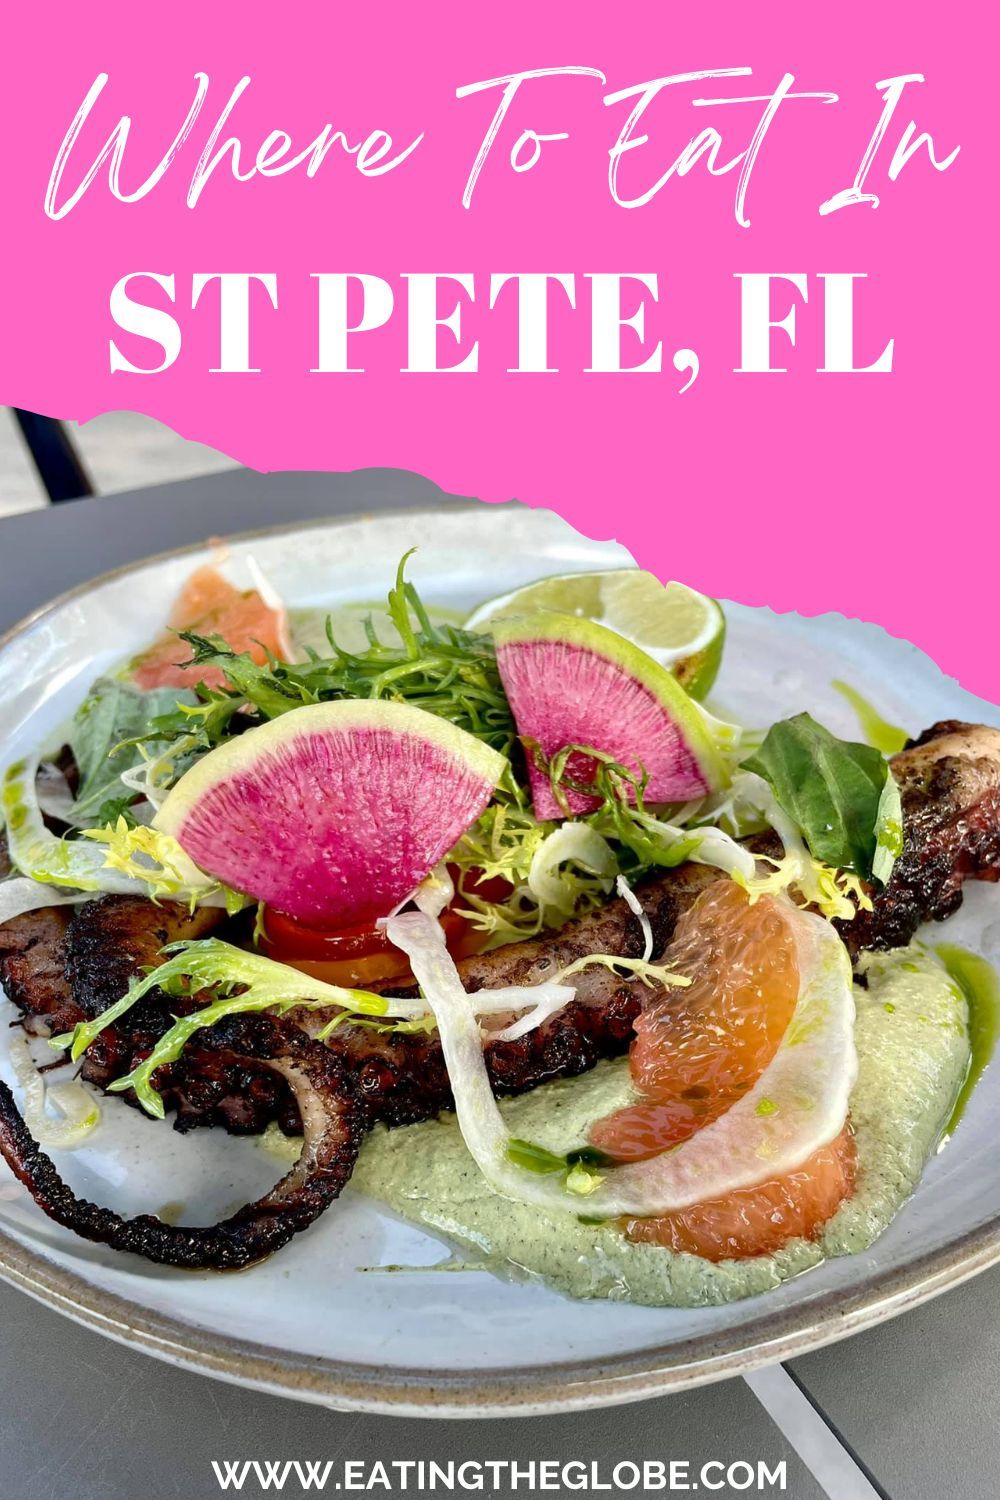 Where To Eat In St. Petersburg, FL